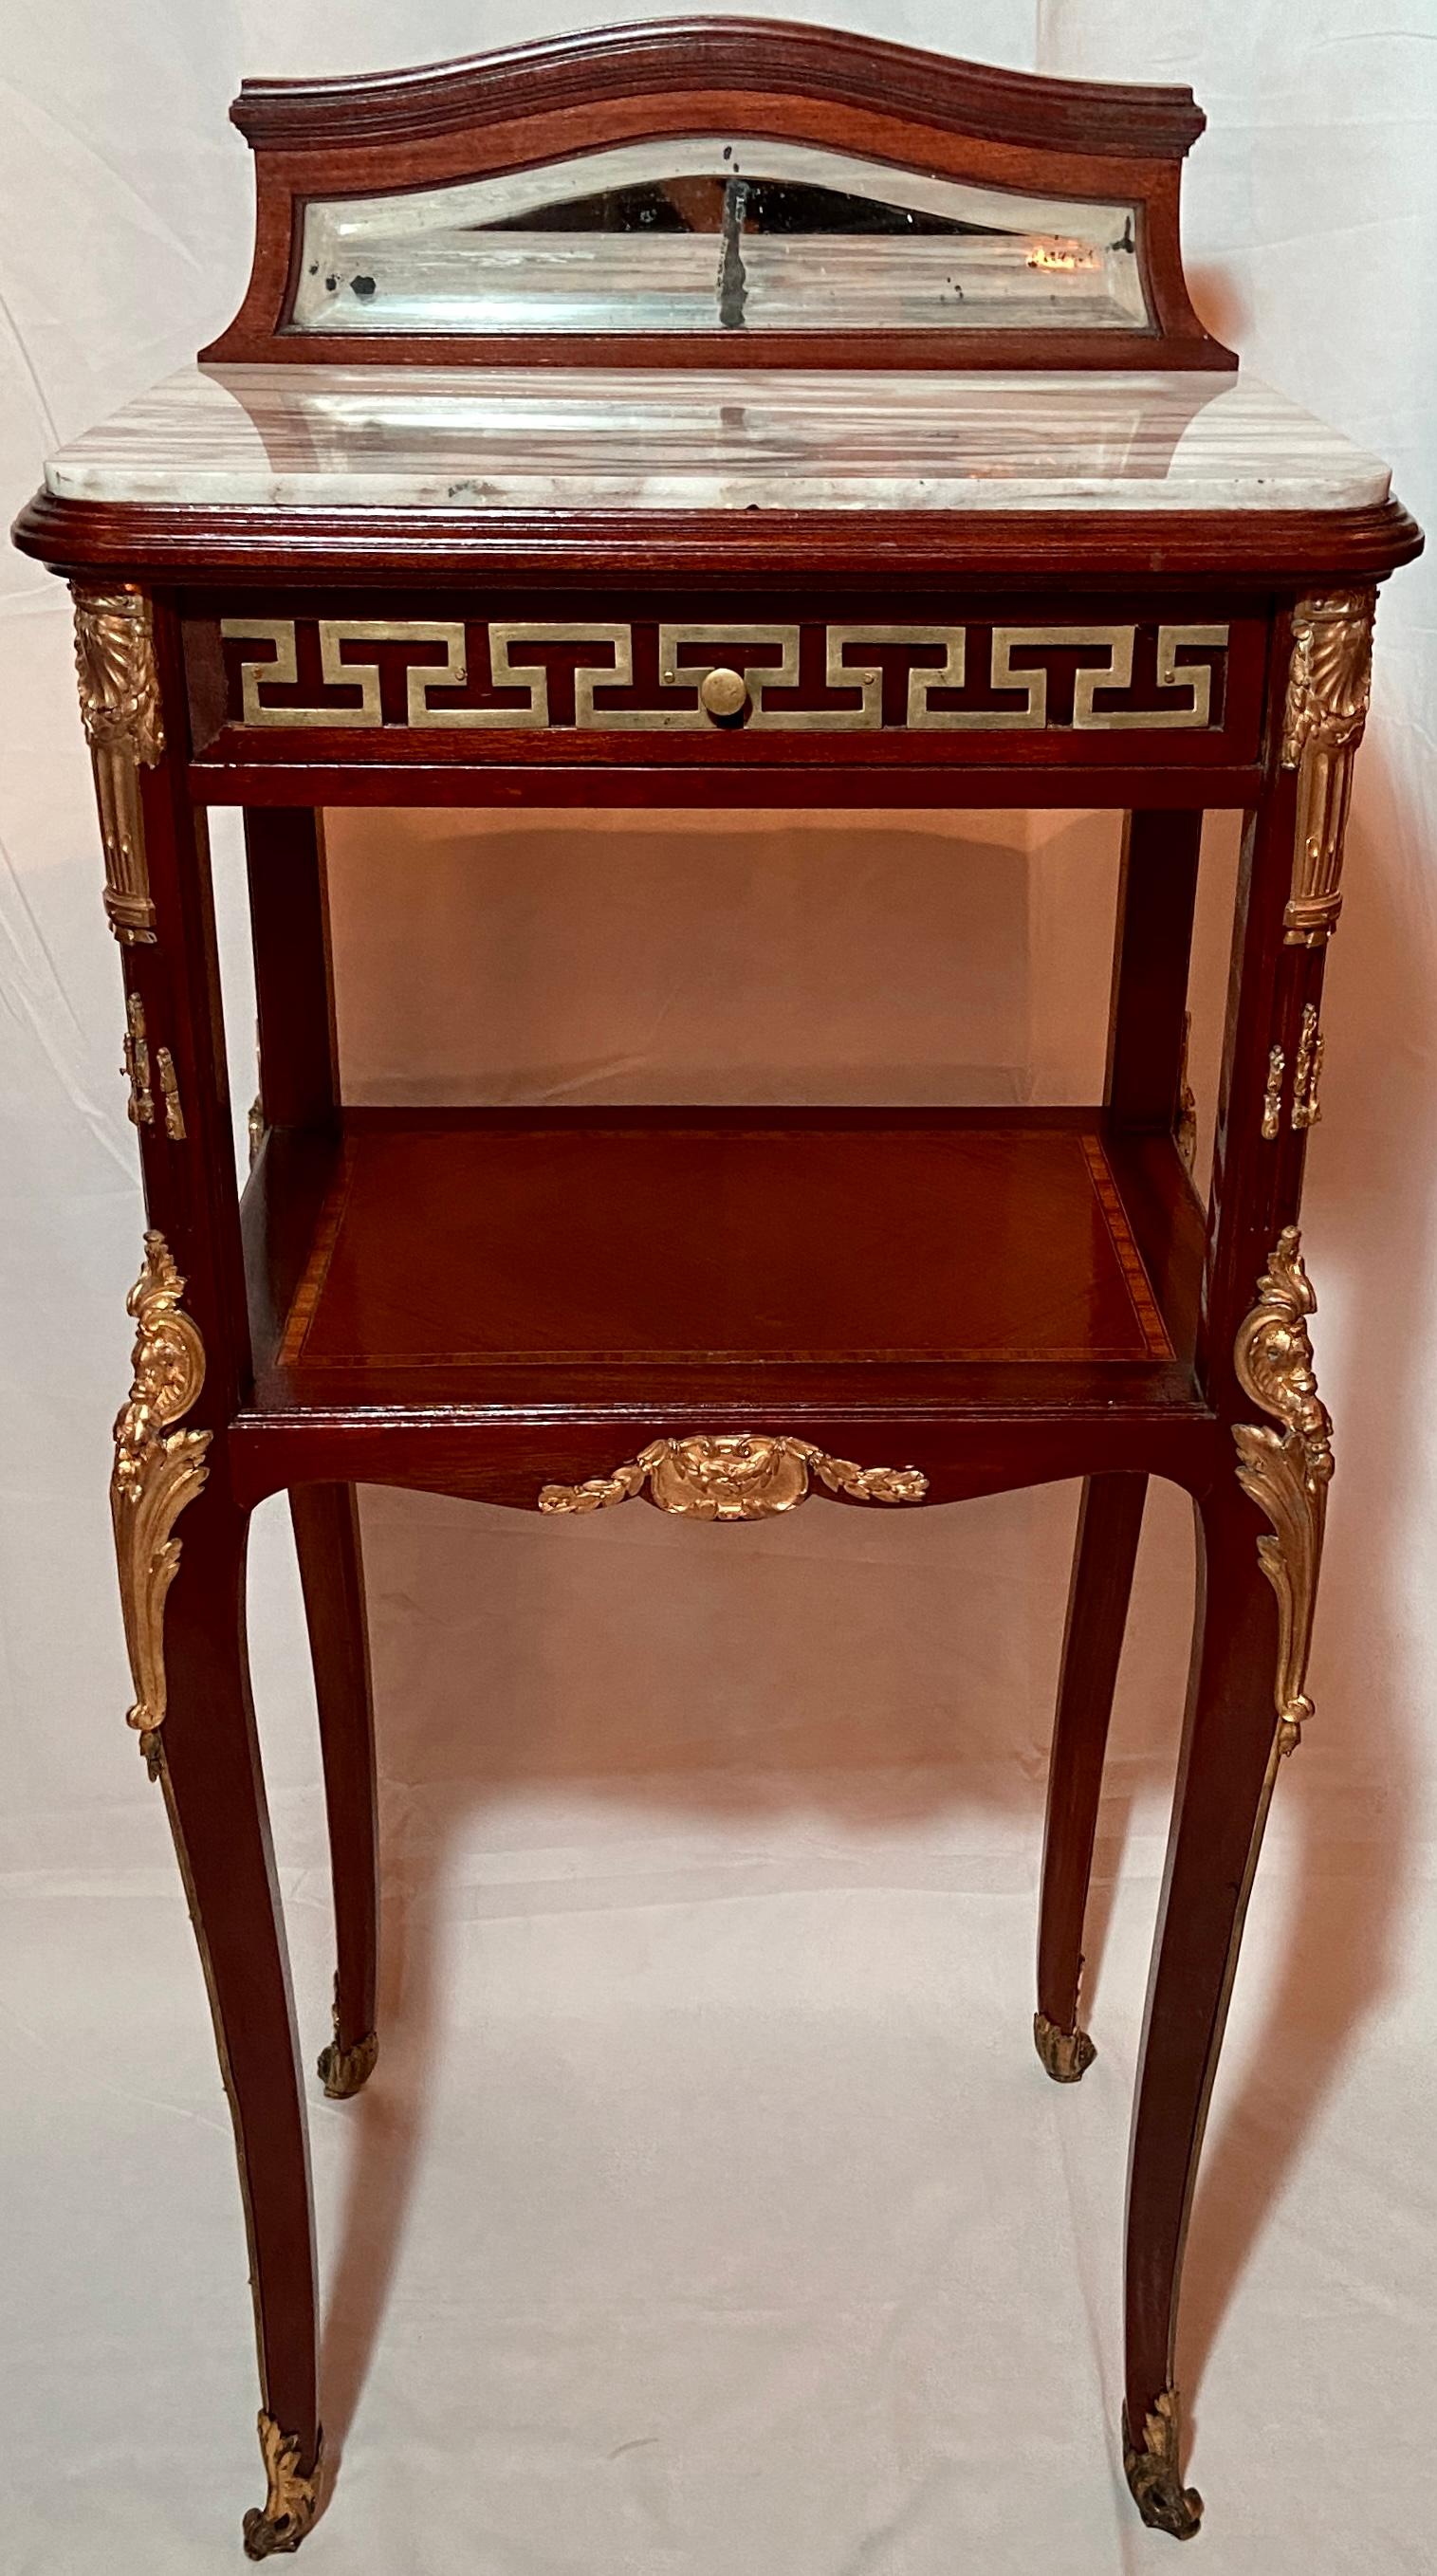 Pair Antique French marble top and bronze d' ore mounted inlaid mahogany nightstand tables, Circa 1890. Stunning pair with gold bronze details and beveled mirror backs.